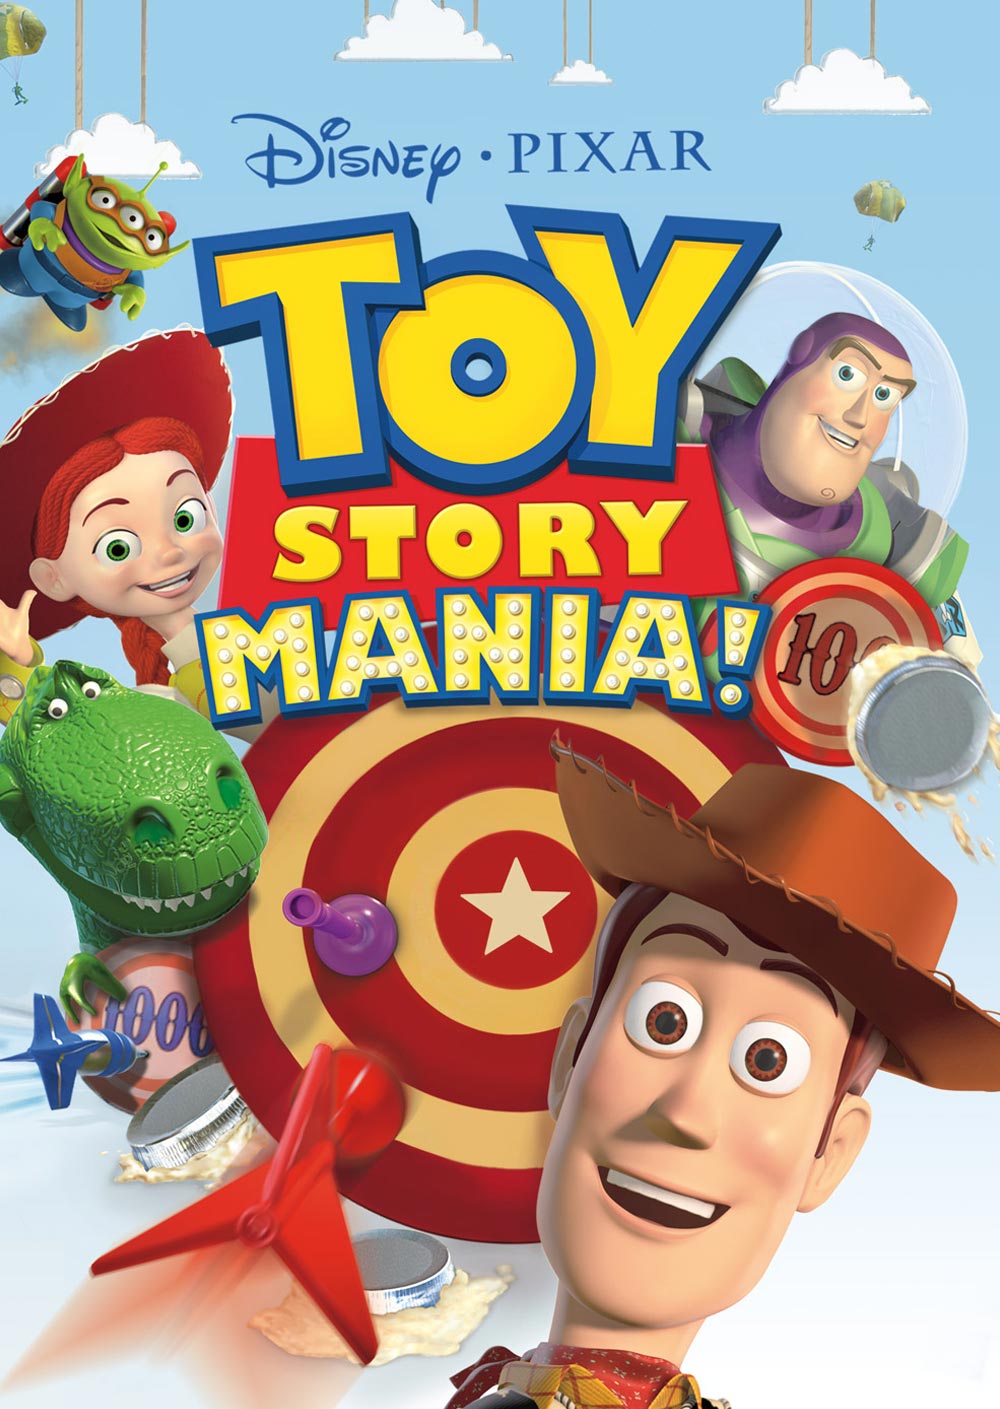 toy story 3 ps4 game